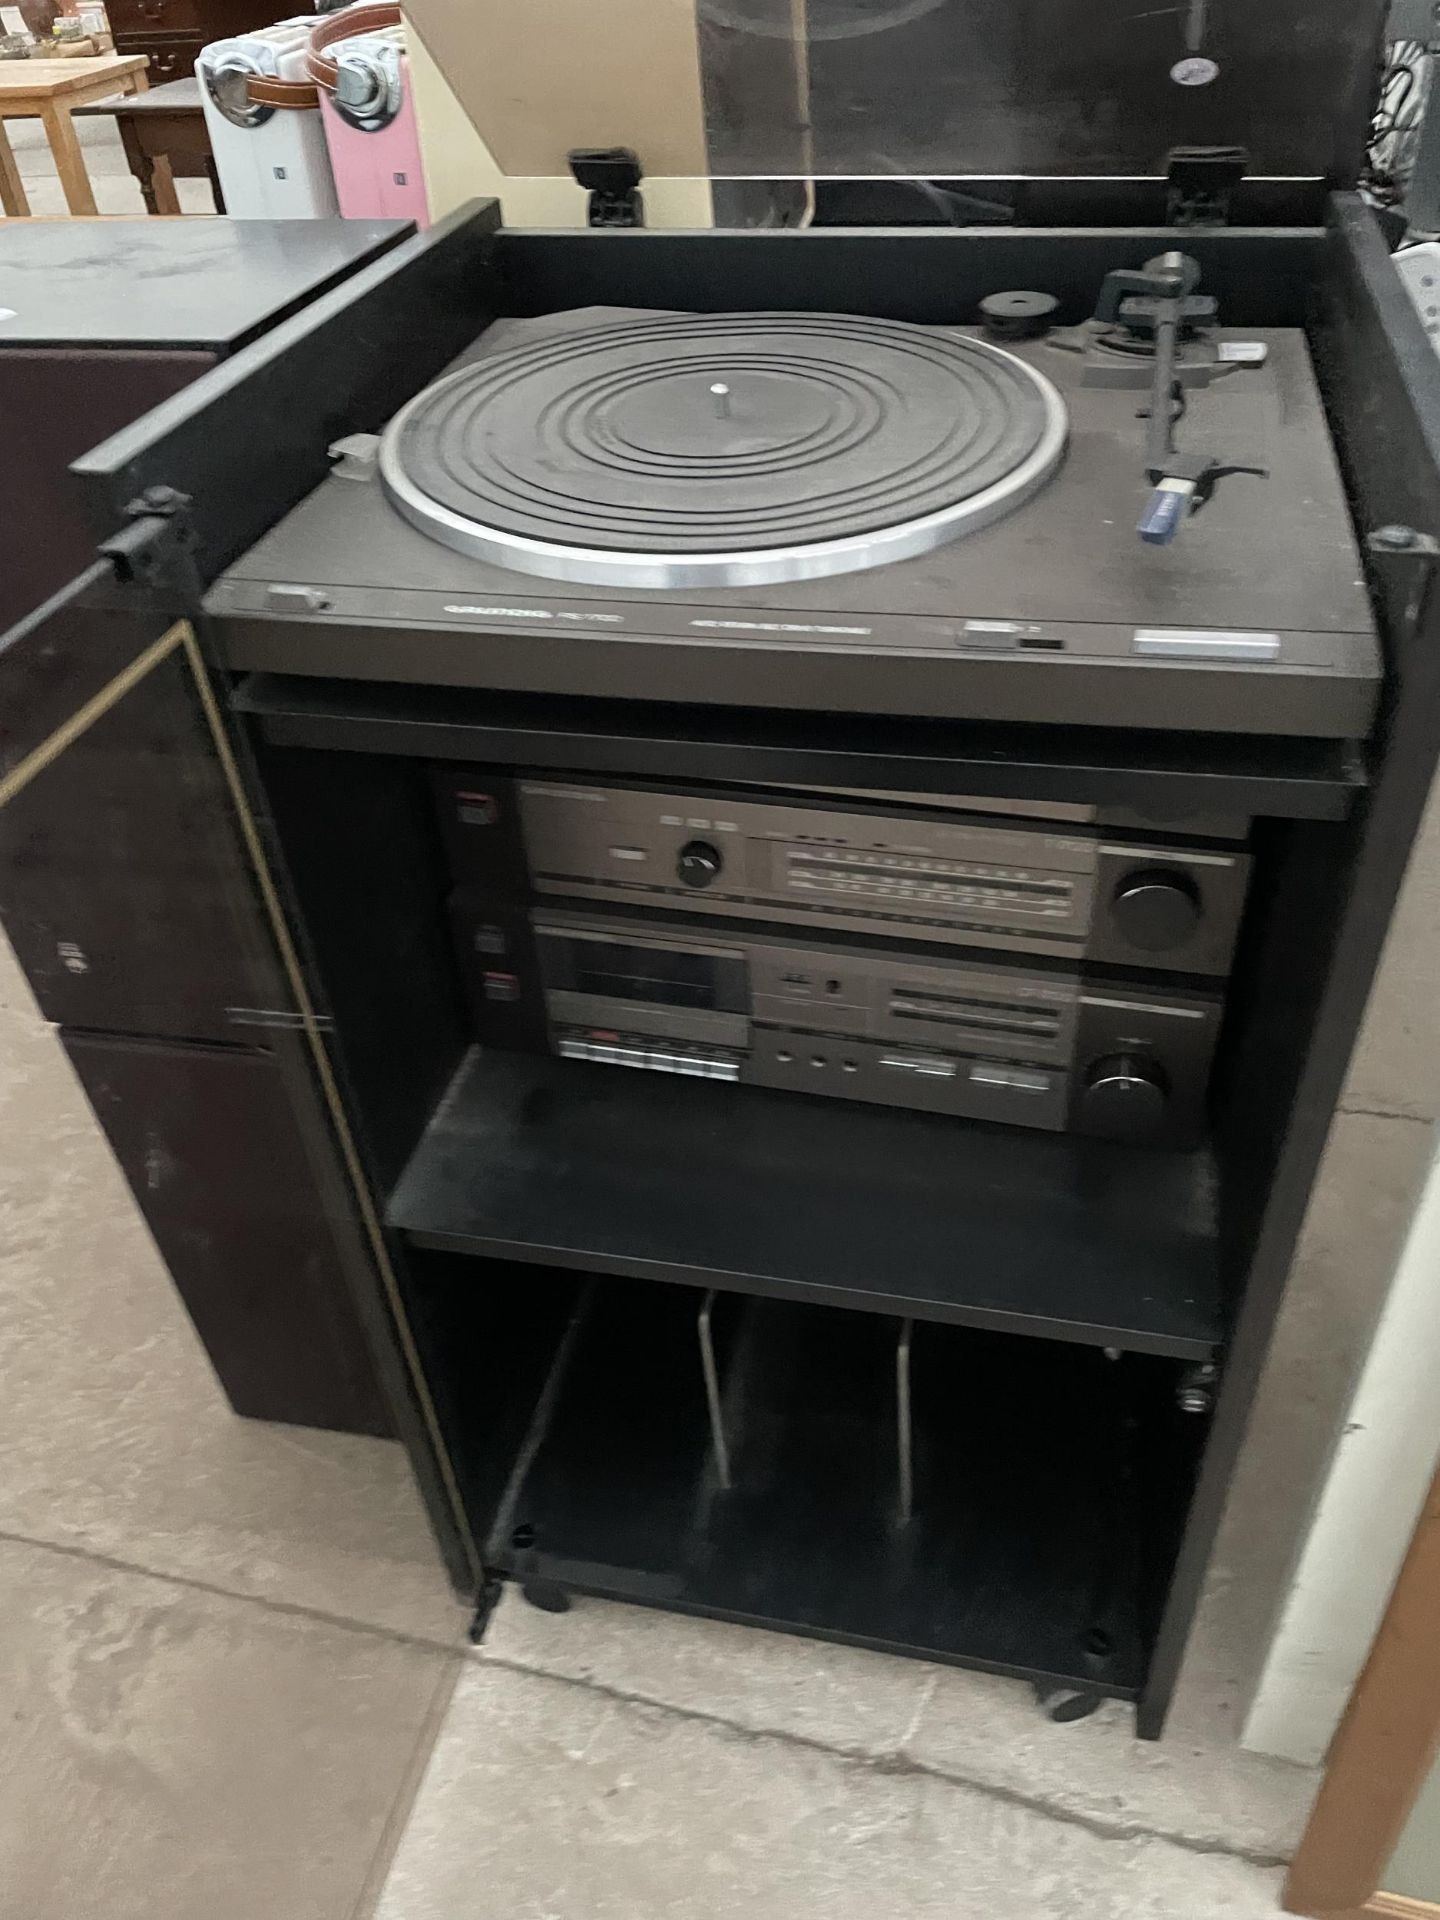 A GRUNDIG RECORD PLAYER AND STEREO SYSTEM WITH TWO SPEAKERS - Image 3 of 5